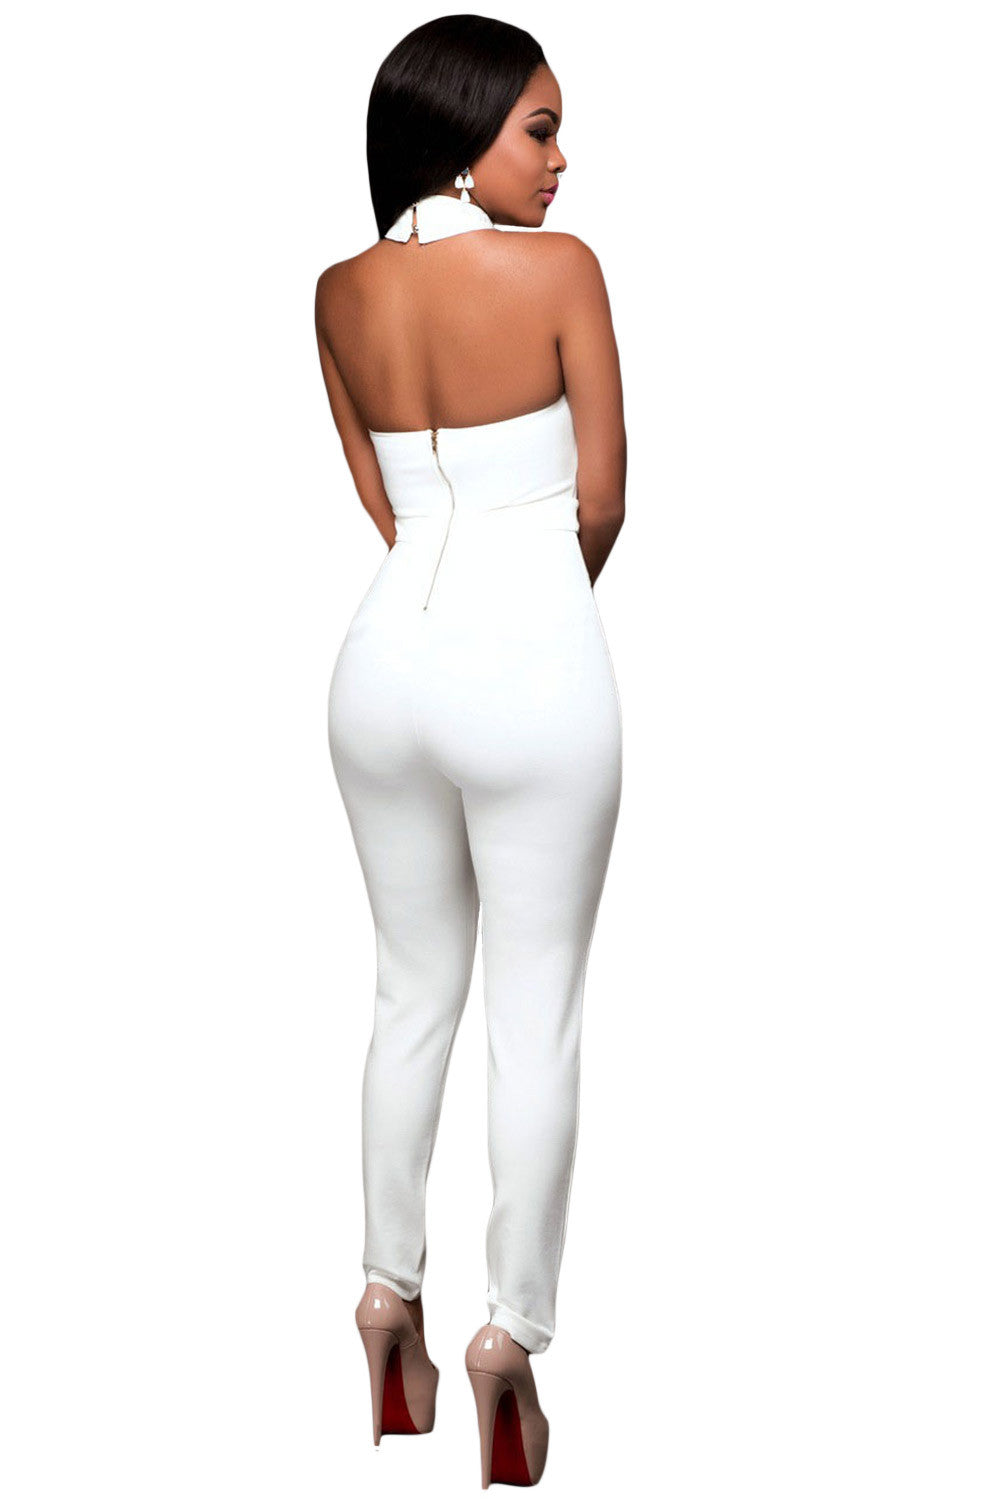 Aayomet Women'S Jumpsuits Women's Sleeveless Backless Bandage O Neck Long  Sleeve Jumpsuit Rompers Bodysuit Catsuit Sport,White XL